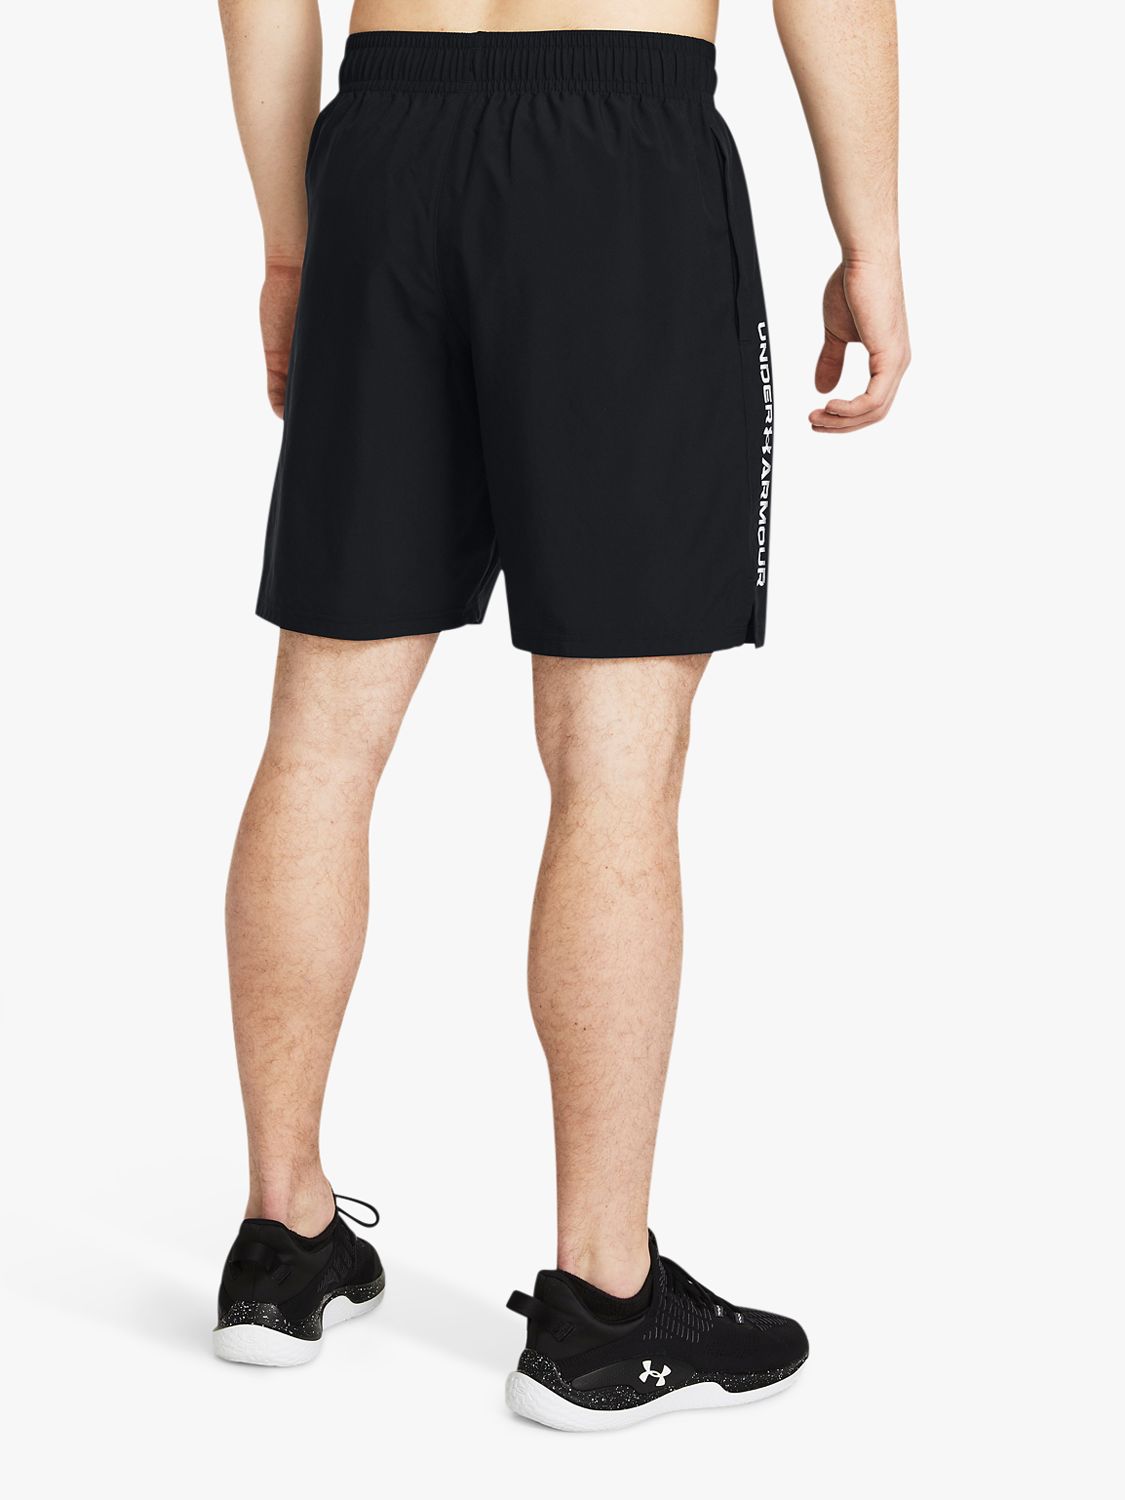 Under Armour Lightweight Woven Shorts, Black/White, S